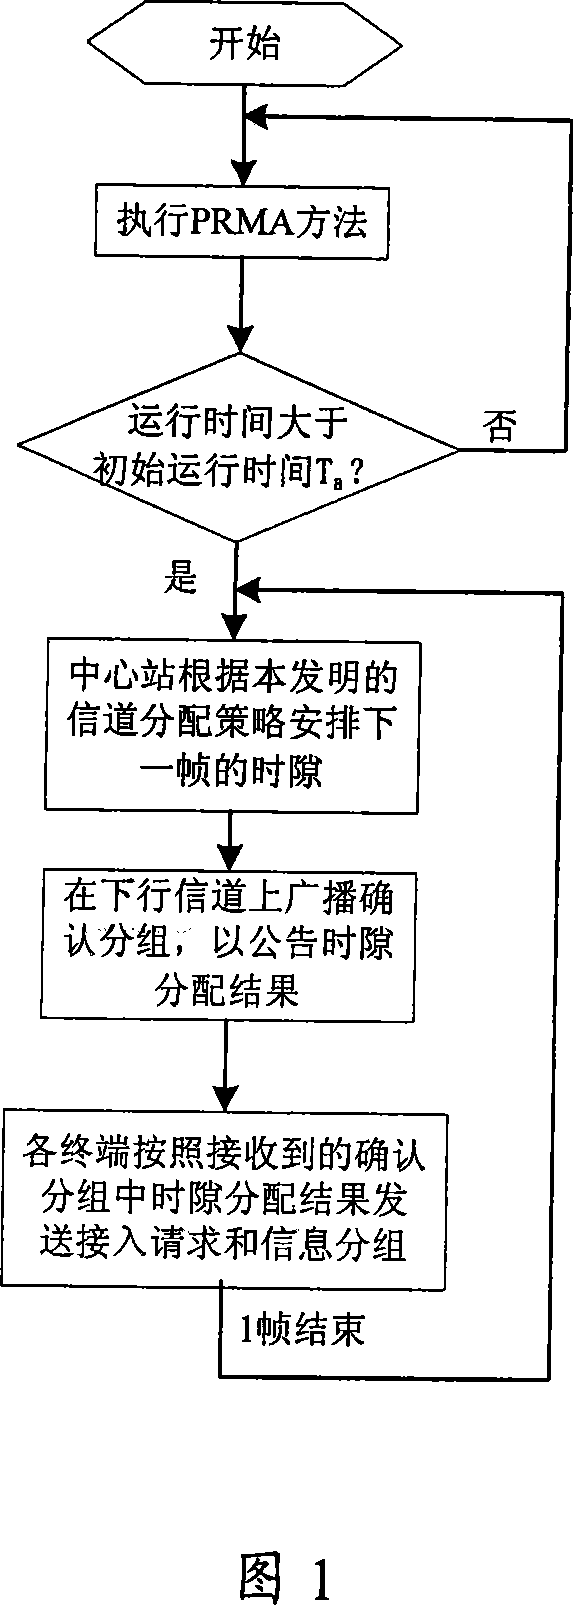 Access method for long propagation delay wireless signal channel